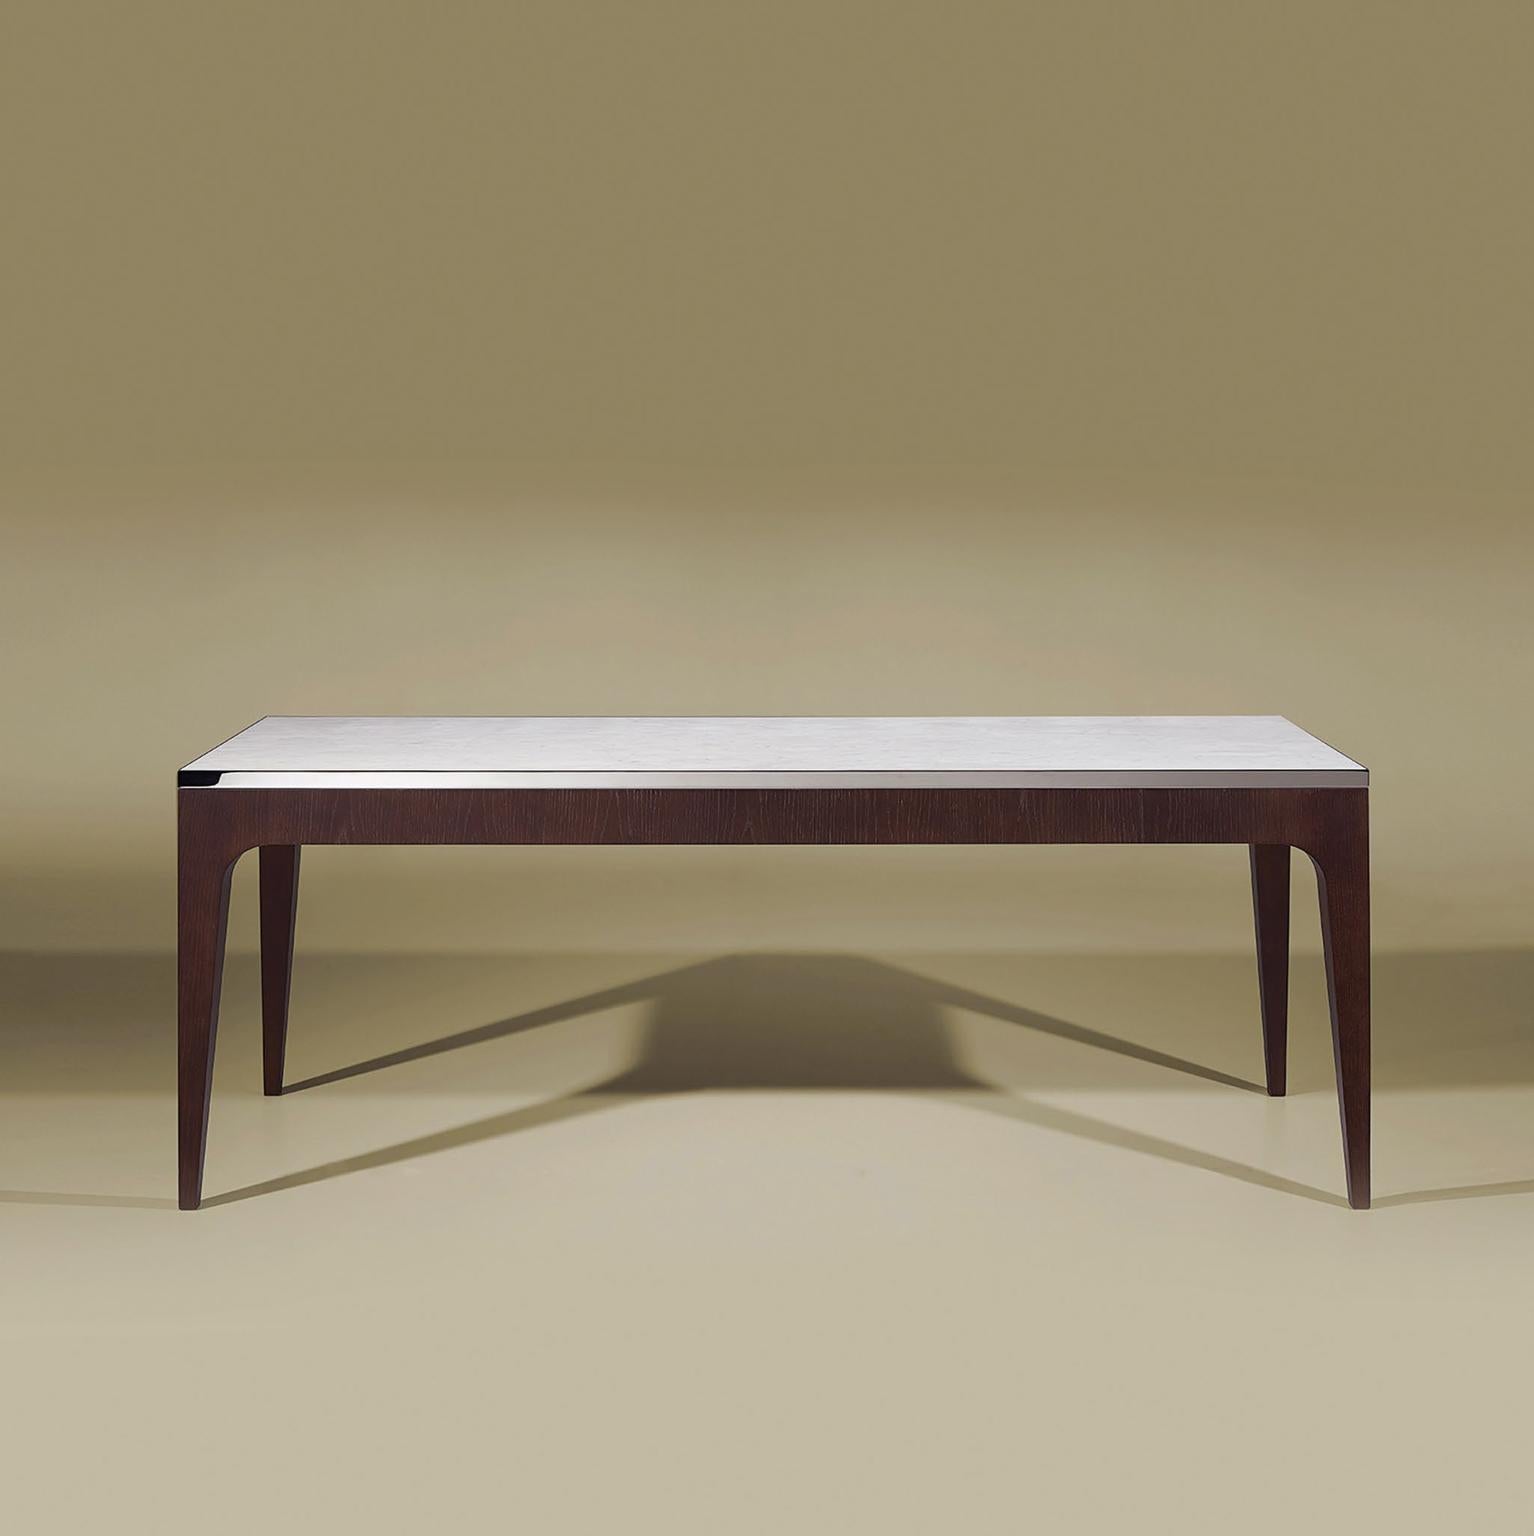 Dining table in wood and lacquer.

Bespoke / Customizable
Identical shapes with different sizes and finishings.
All RAL colors available. (Mate / Half Gloss / Gloss).